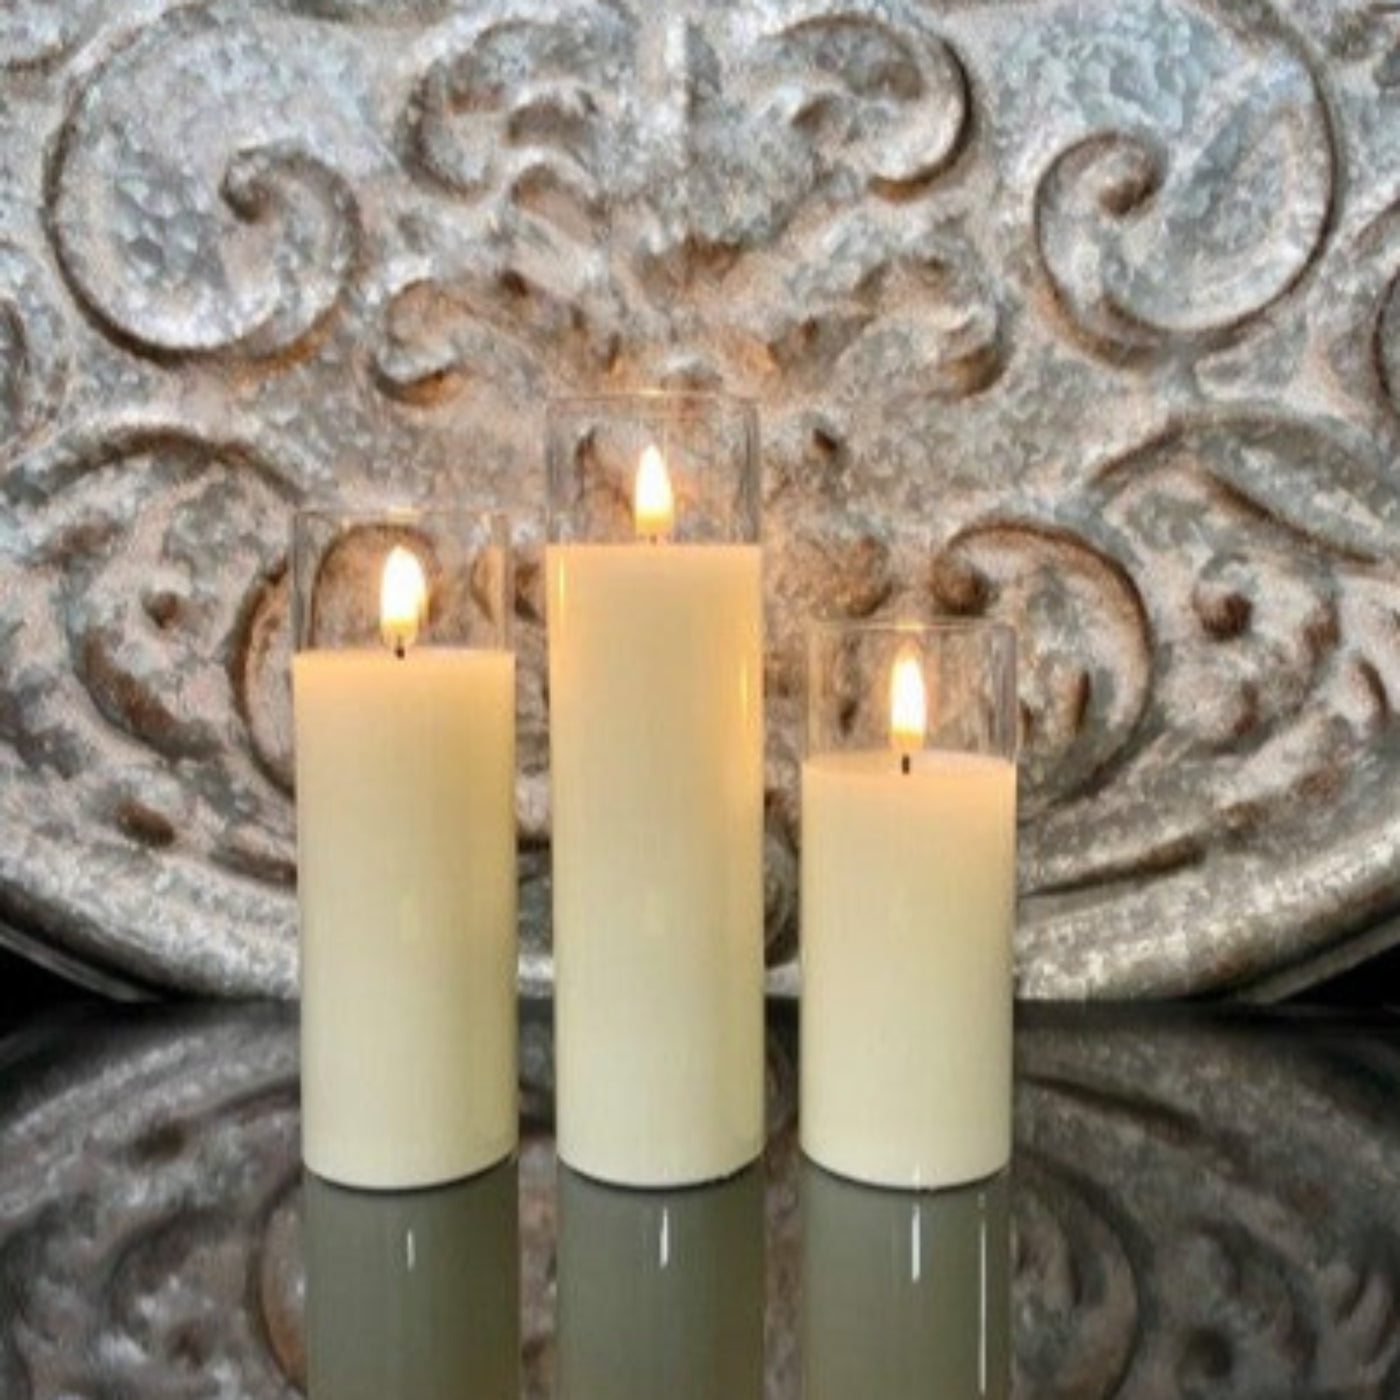 Simply Ivory Radiance Petite Trio Candle Set